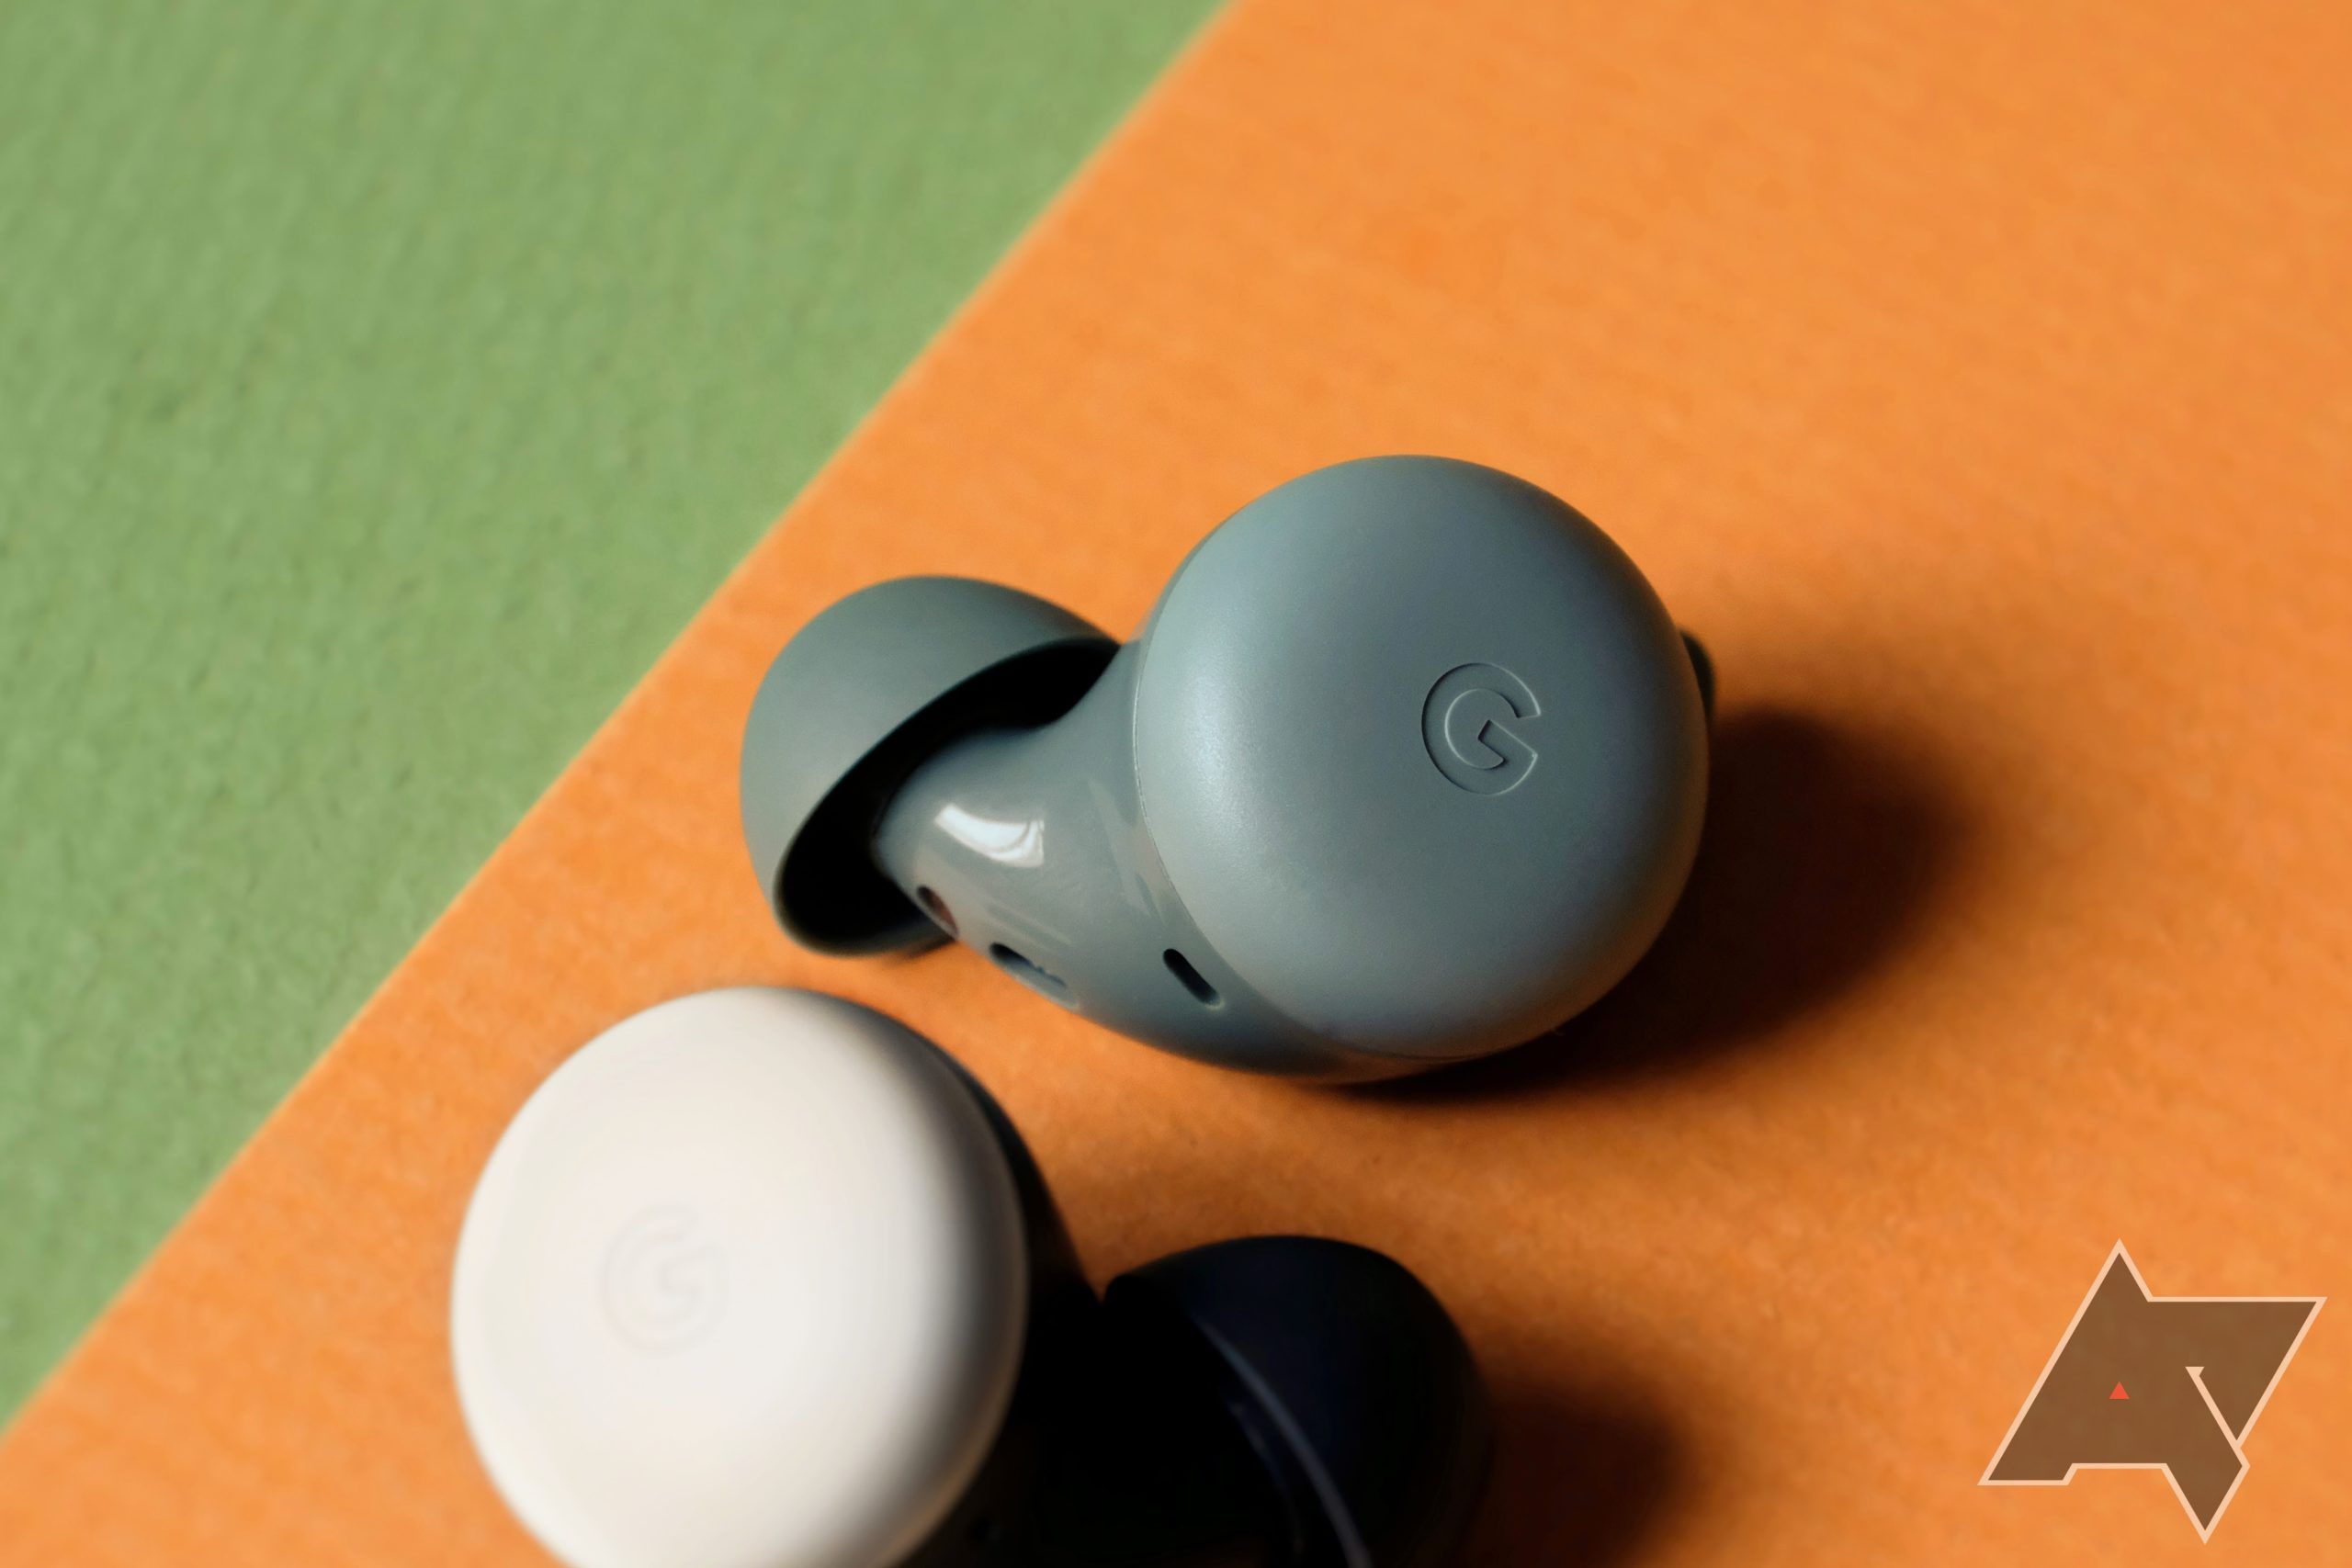 You can now get the Pixel Buds A-Series in a new color